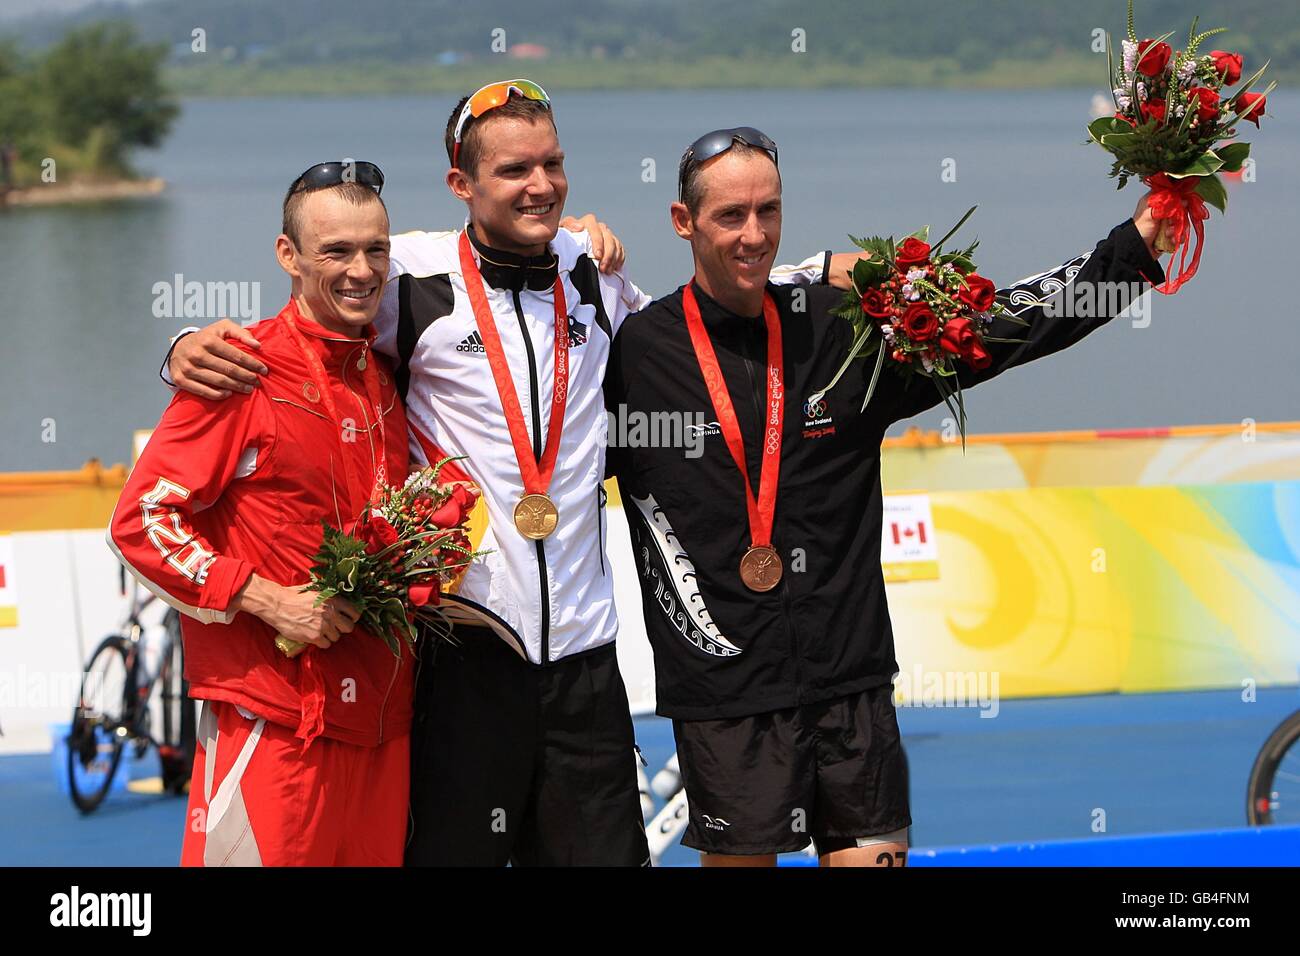 Germany's Jan Frodeno with his gold medal (centre), Canada's Simon Whitfield with his silver medal (left), and New Zealand's Bevan Docherty with his bronze medal in the Men's Triathlon at the Triathlon Venue in Beijing during the 2008 Beijing Olympic Games. Stock Photo